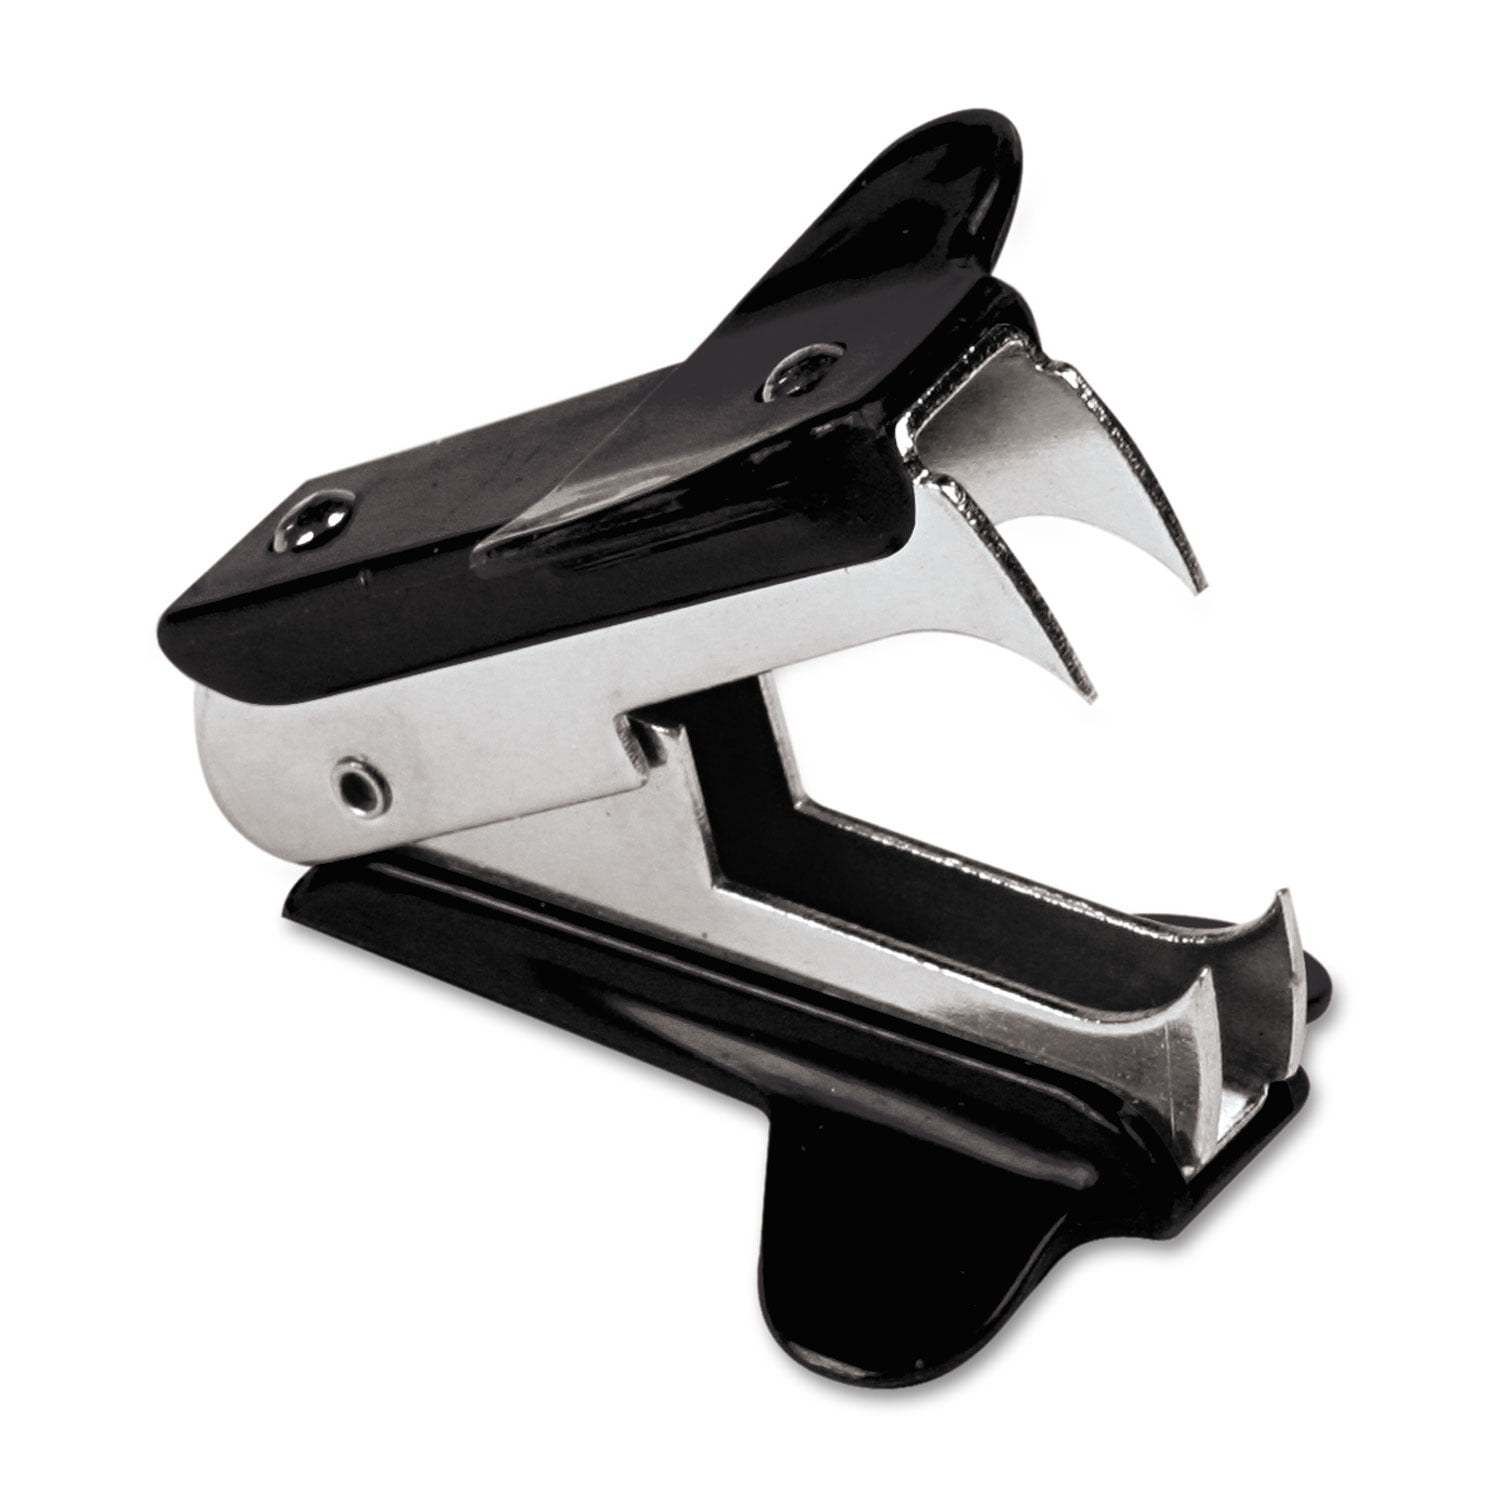 Pack of 3 Yohii Staple Remover Jaw Style Staple Puller 